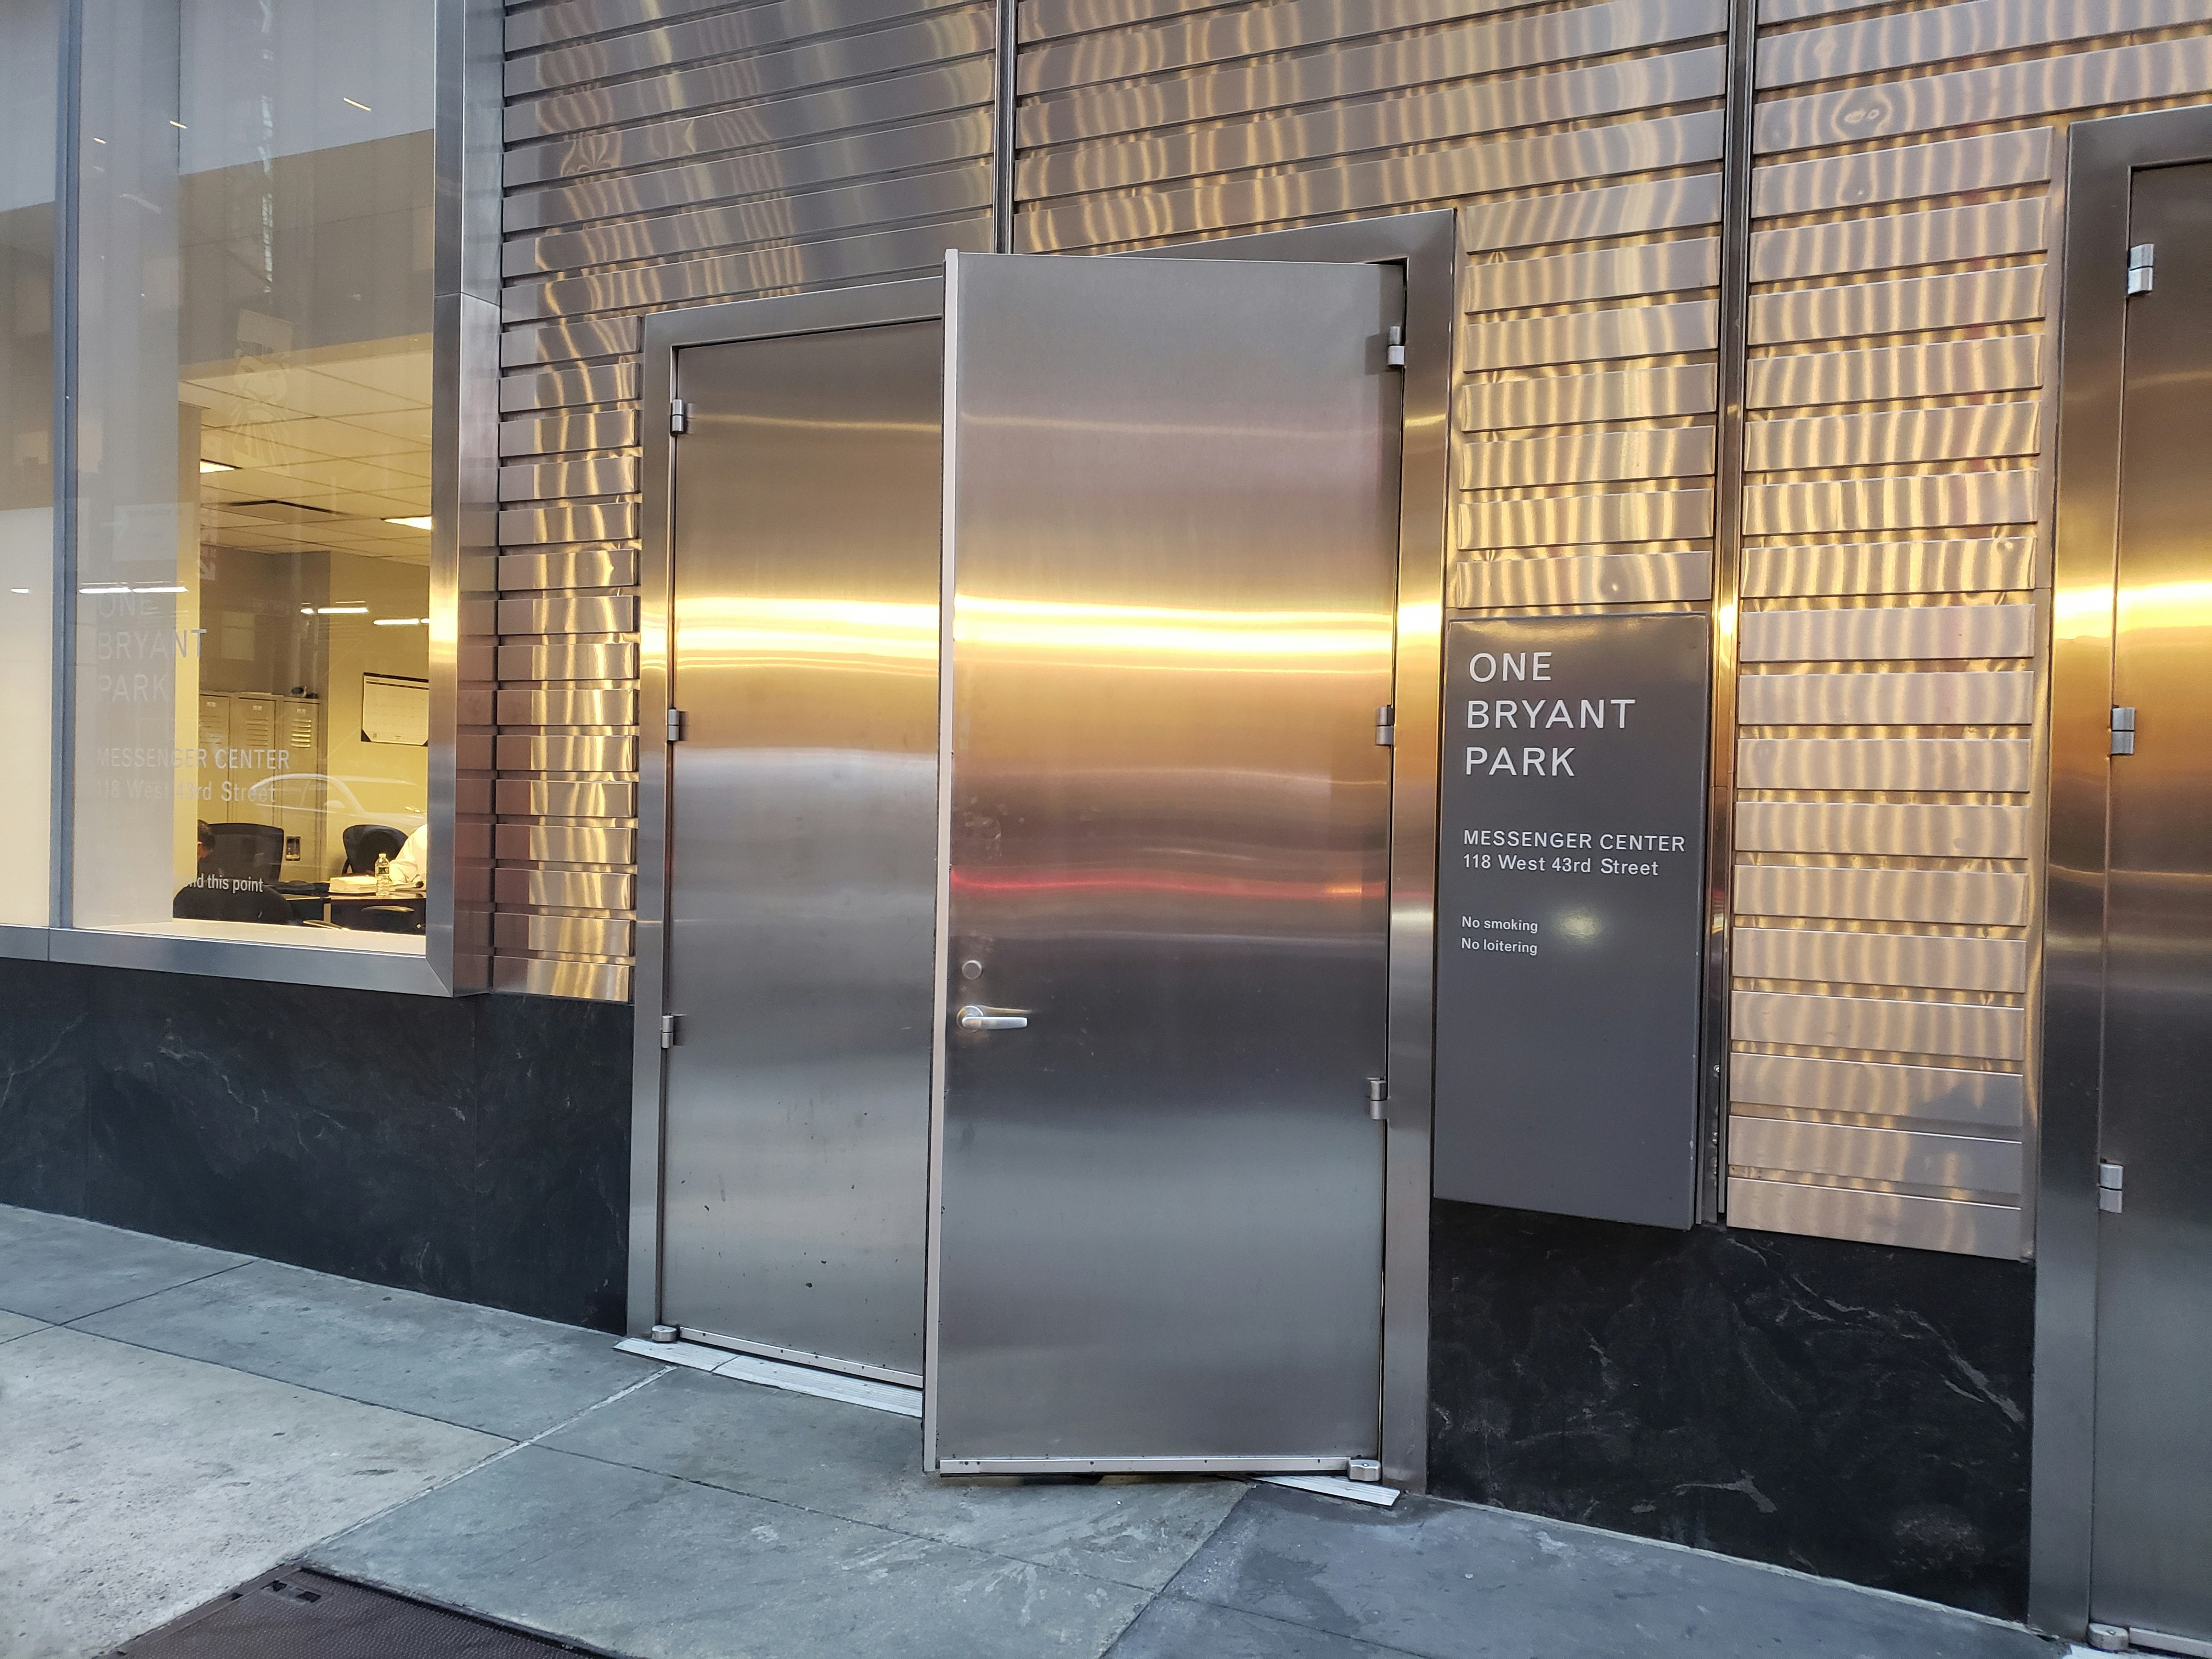 The silver metal clad facade of the Bank of America Tower service entrances, which have a different address than the hotel itself.